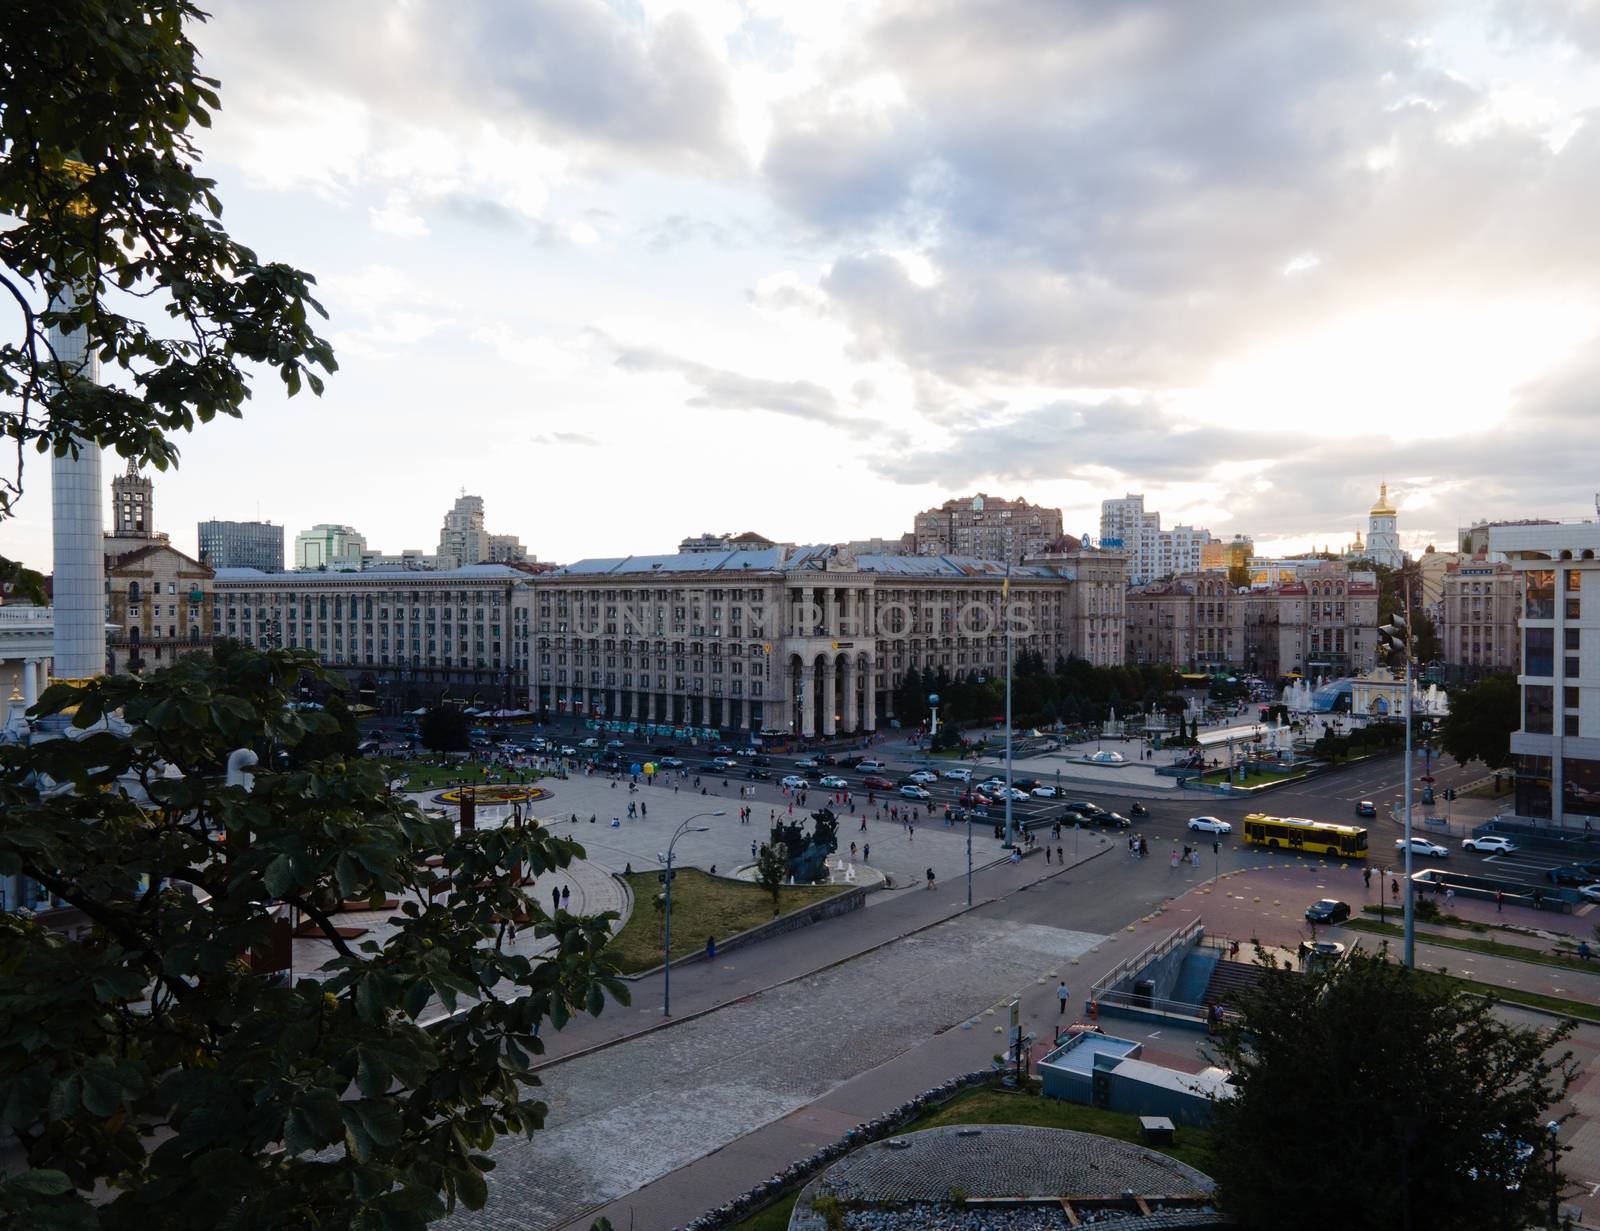 The architecture of Kyiv. Ukraine: Independence Square Maidan